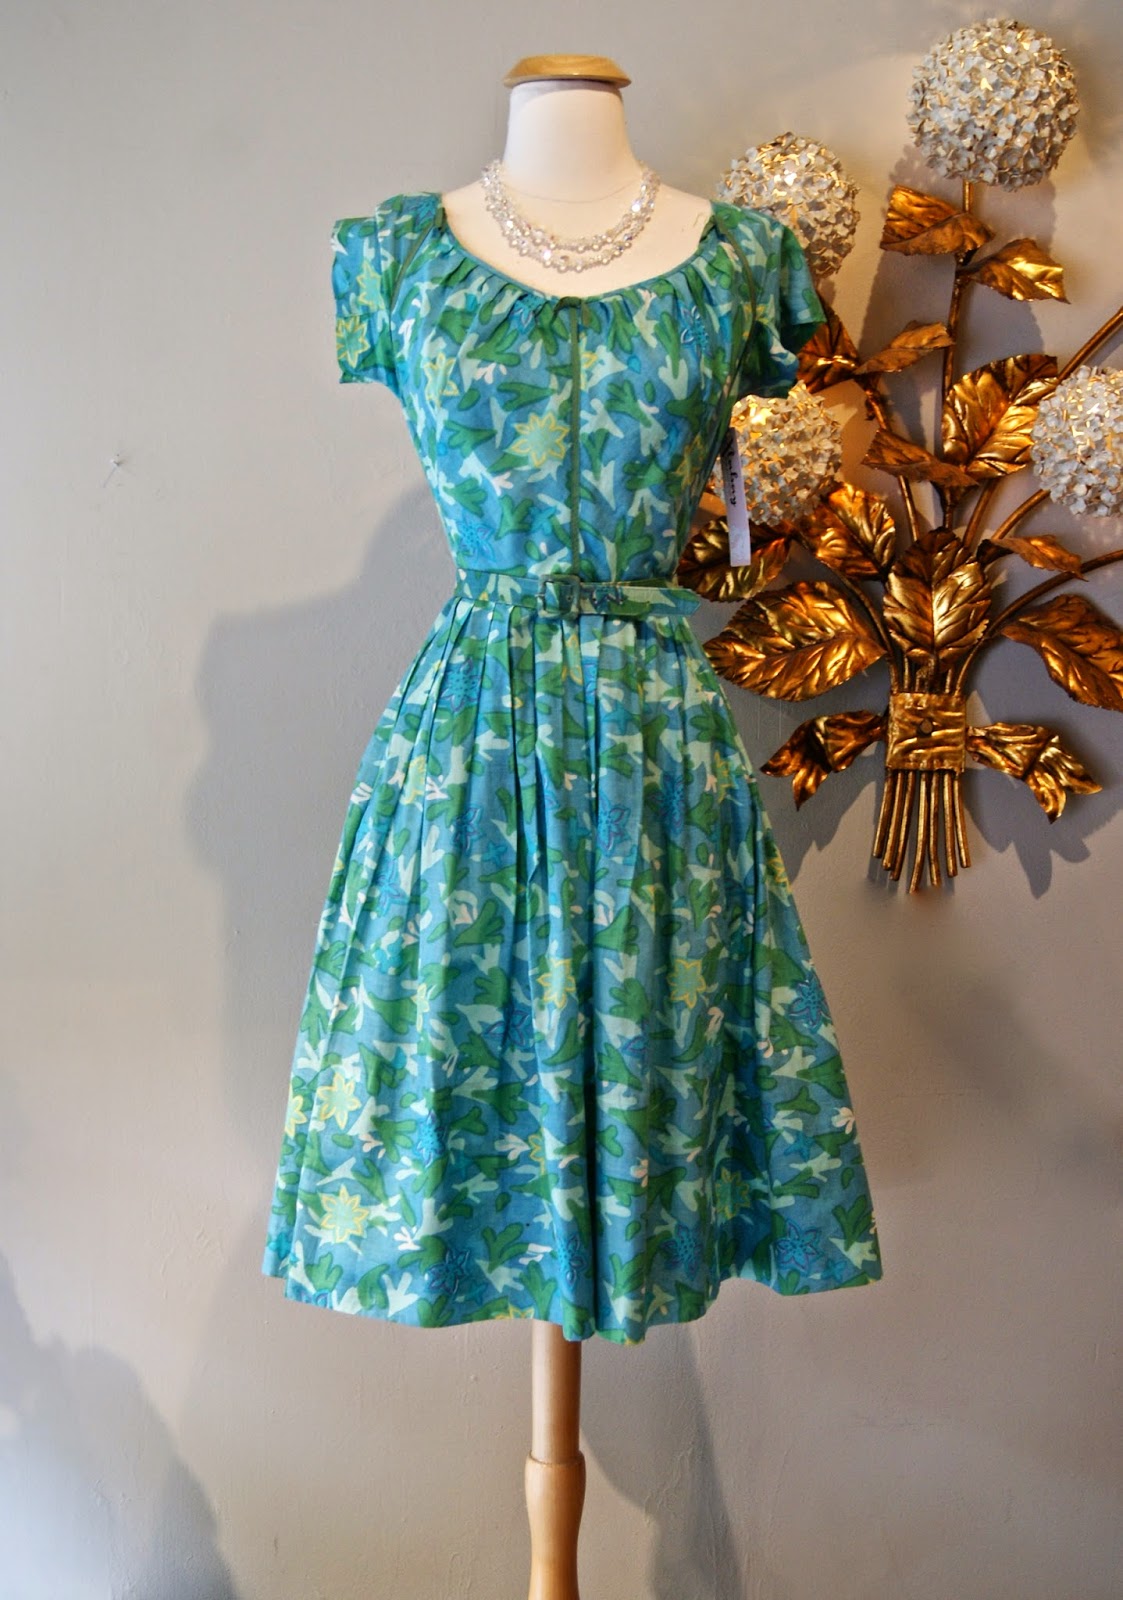 Xtabay Vintage Clothing Boutique - Portland, Oregon: New Arrivals and ...